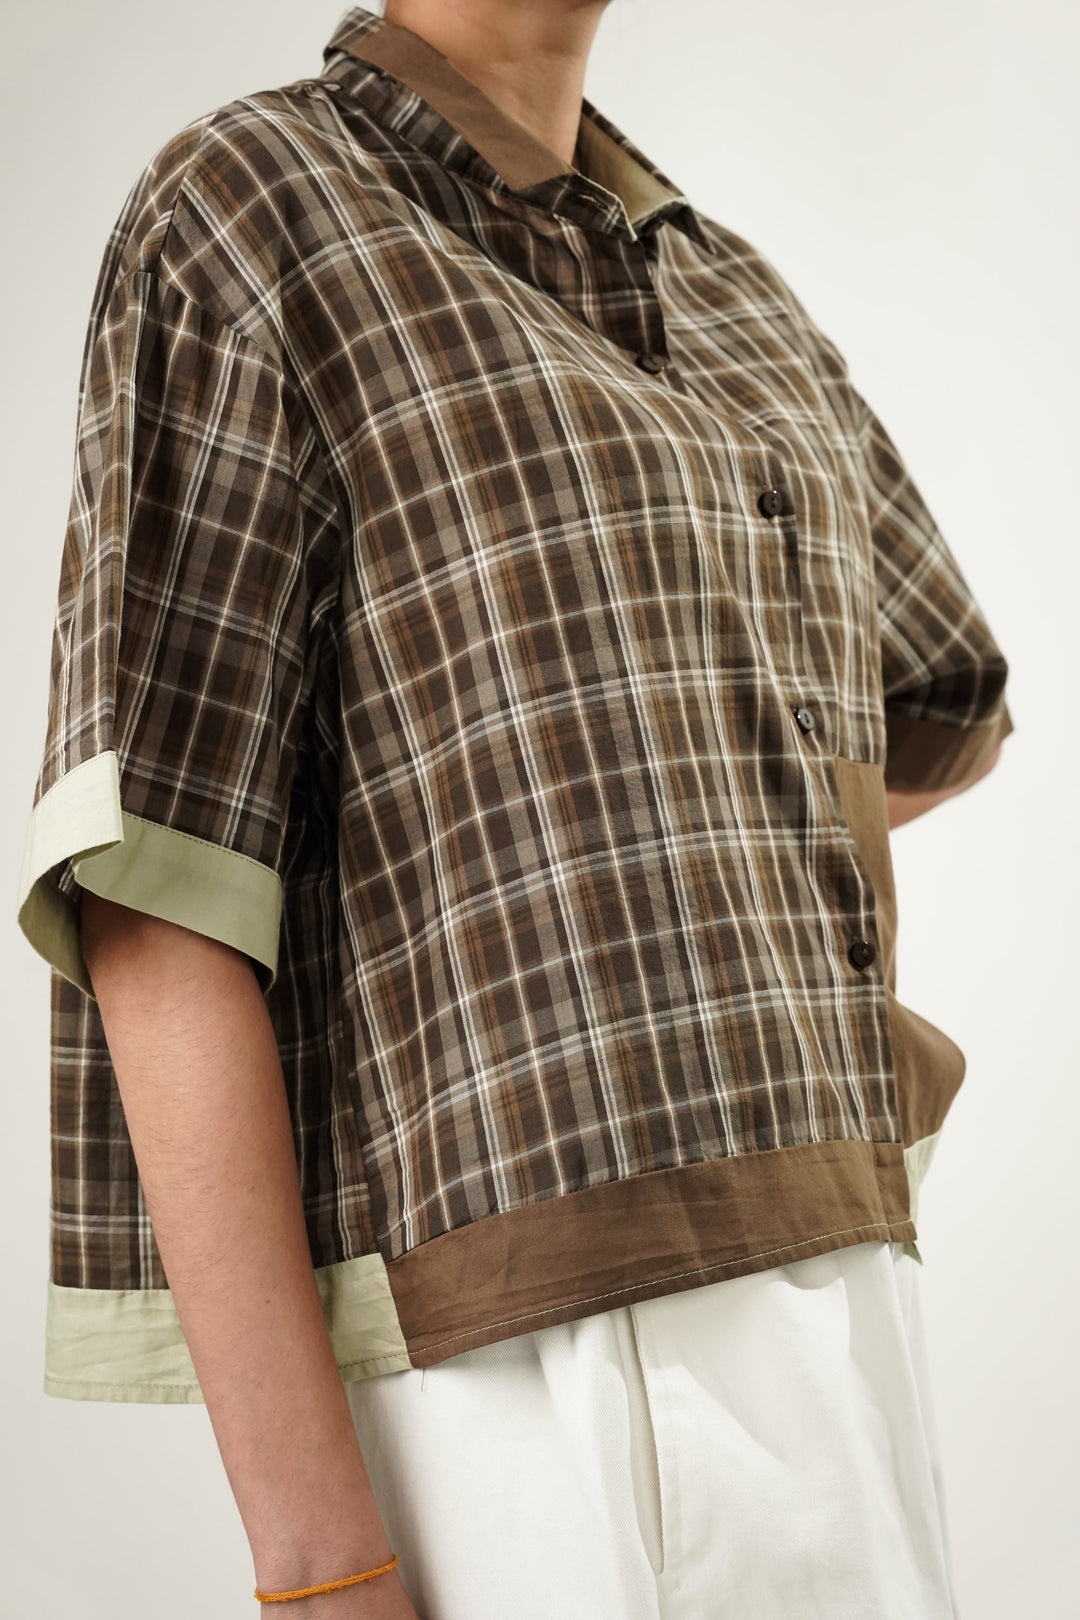 Trendy patched plaid shirts for streetwear